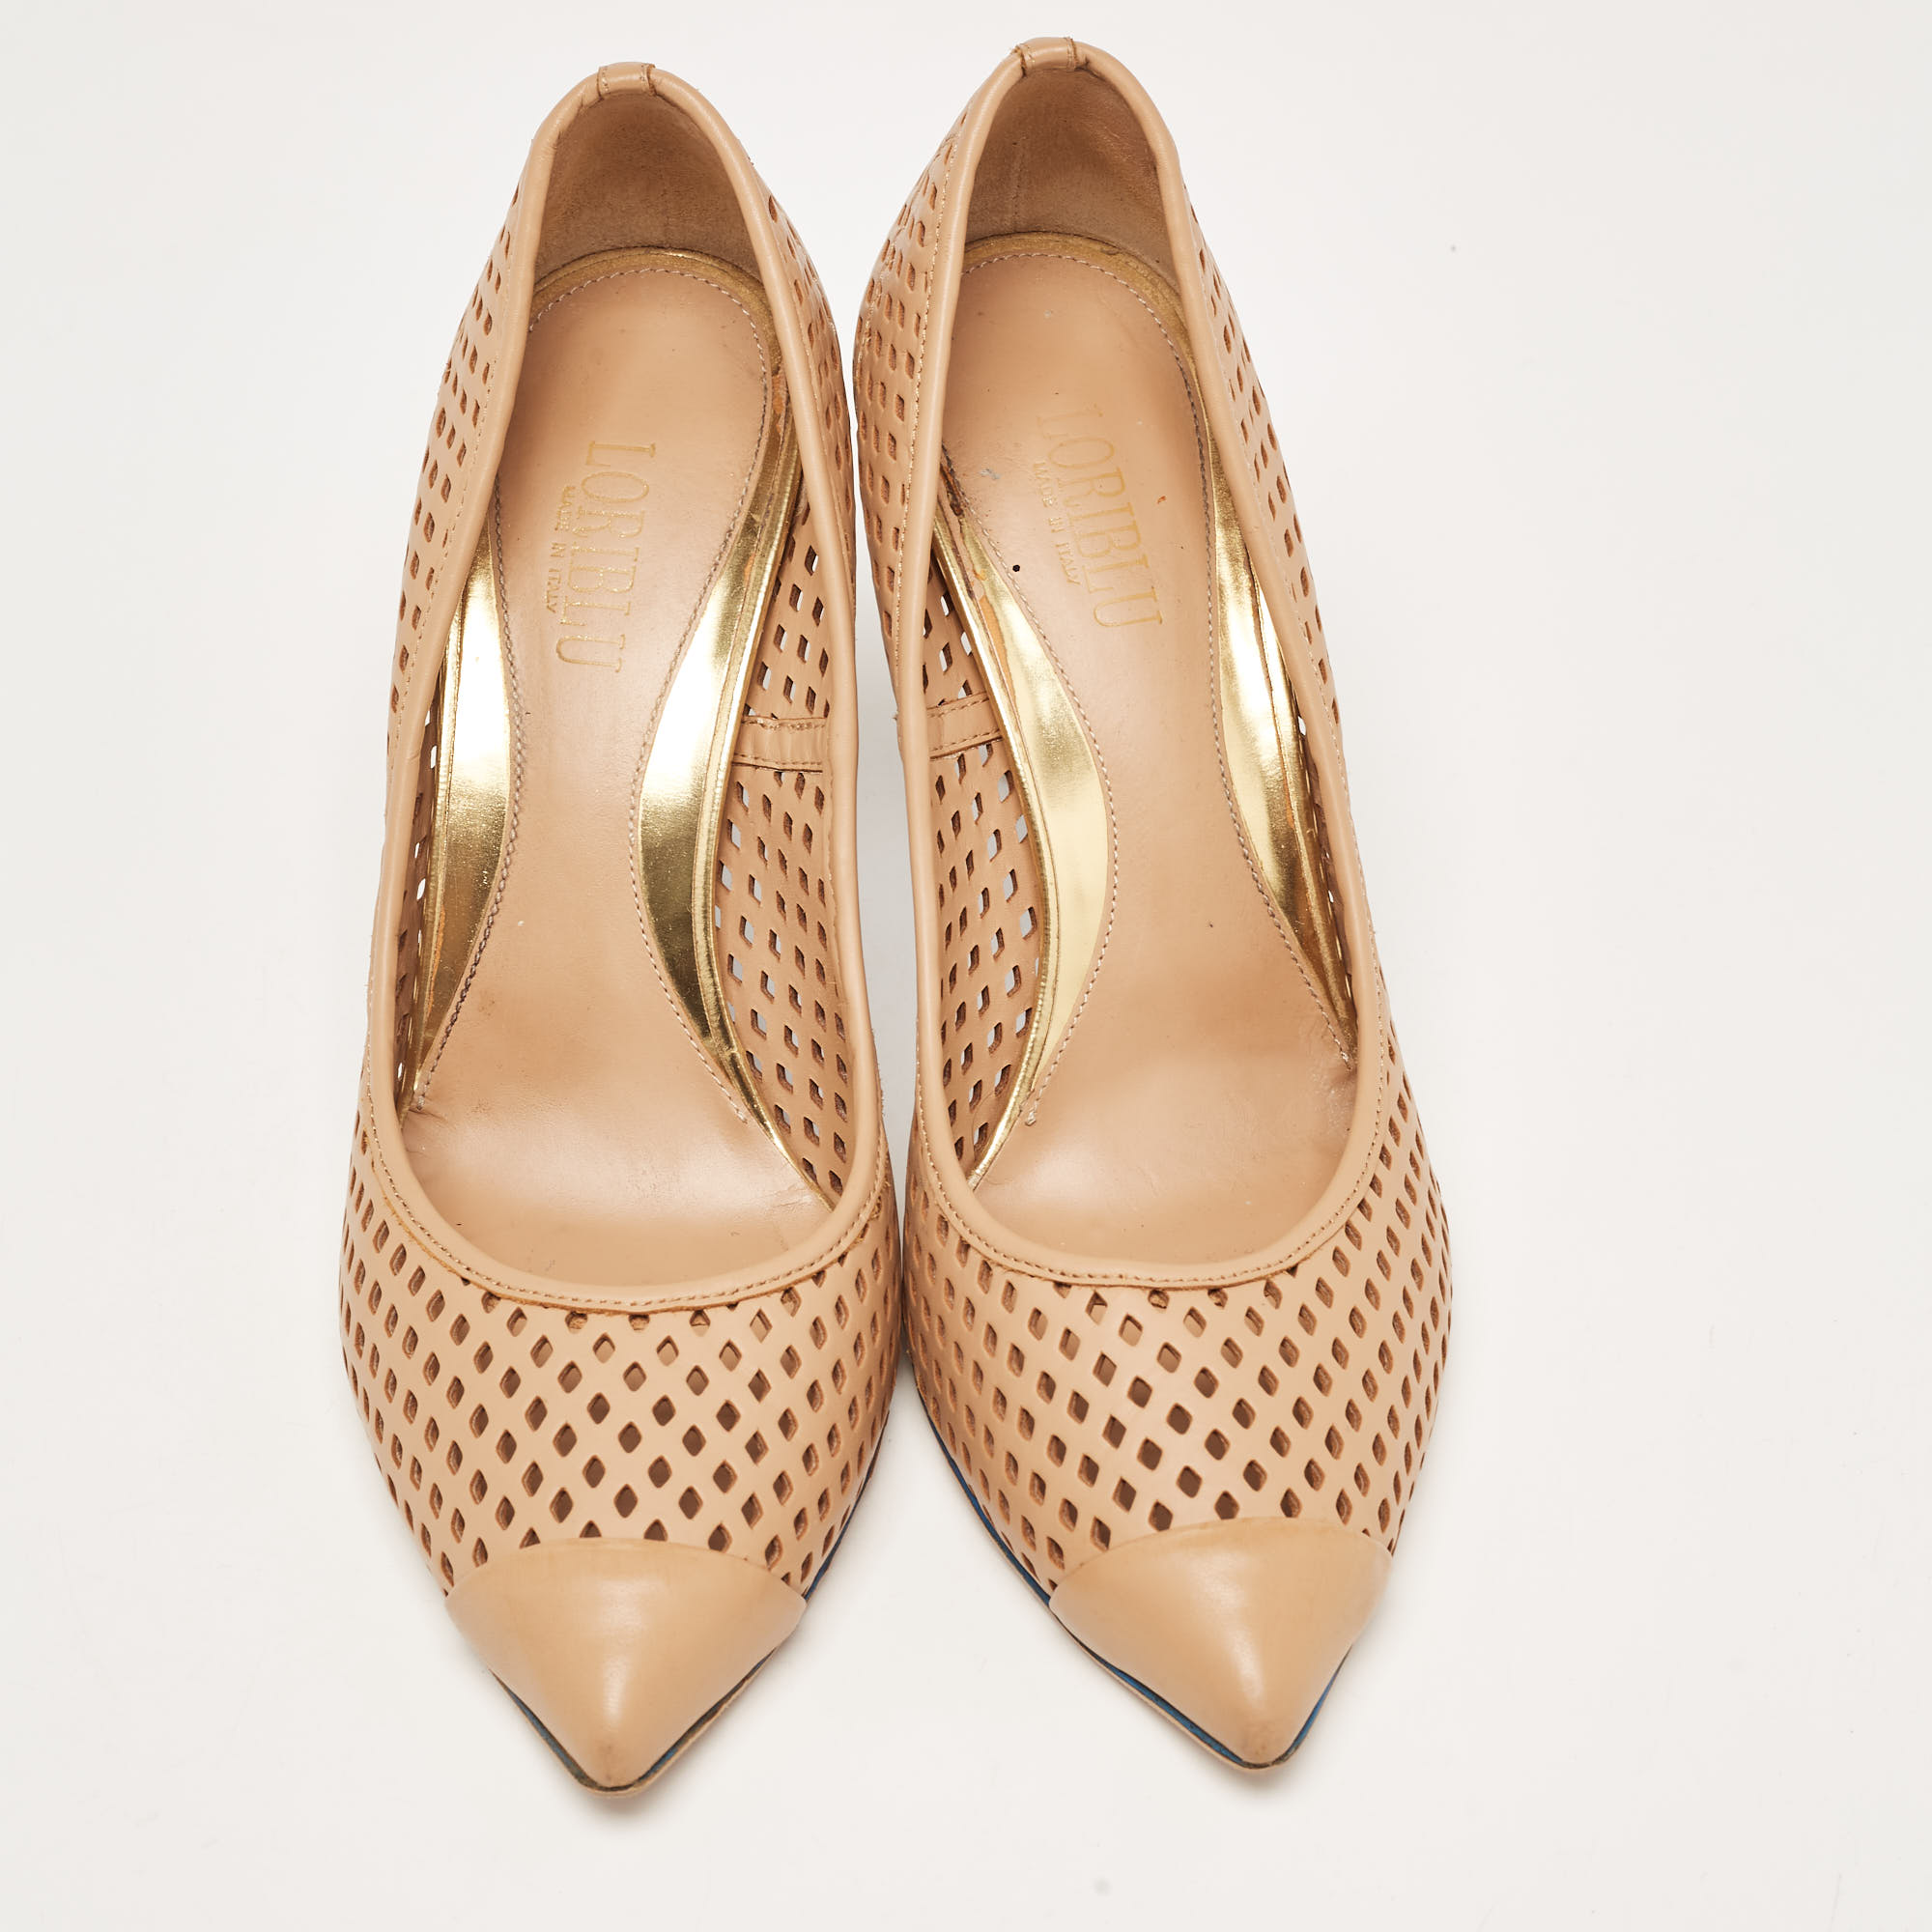 Loriblu Beige Perforated Leather Pointed Toe Pumps Size 40